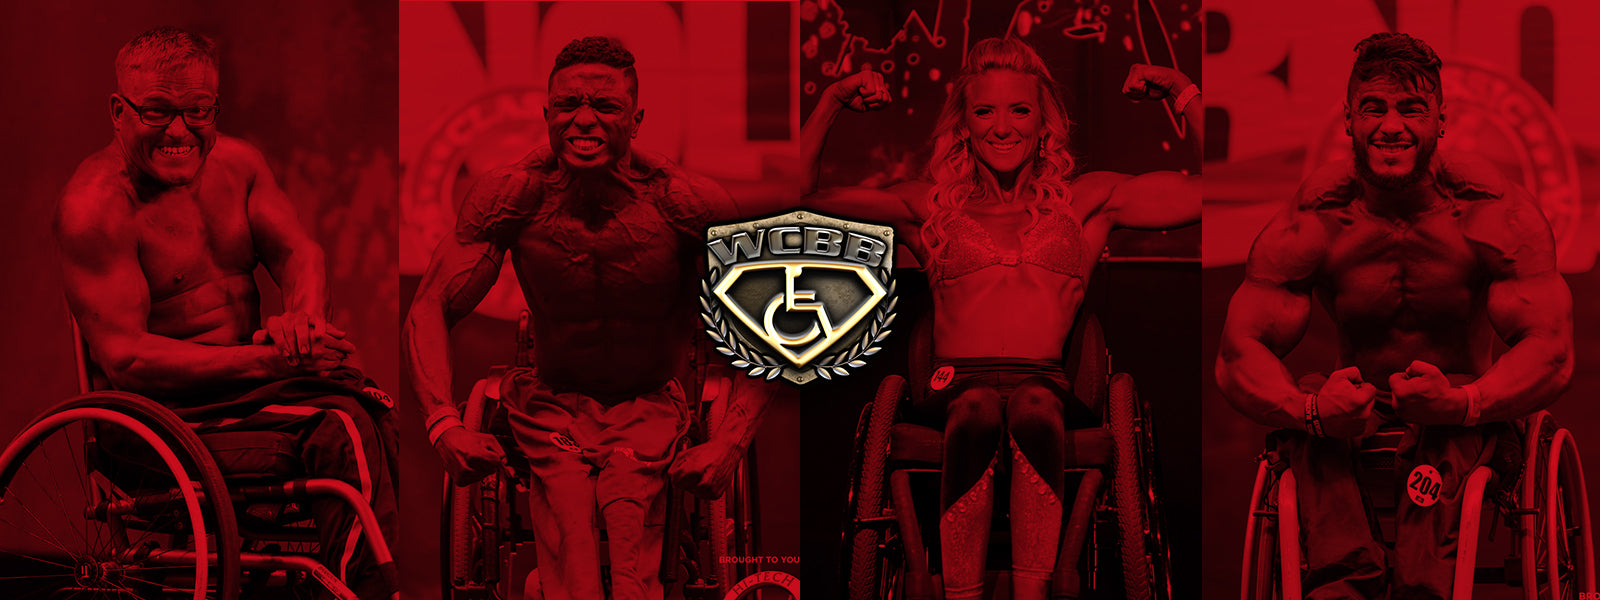 MUTANT is now a major sponsor for Wheelchair Bodybuilding!